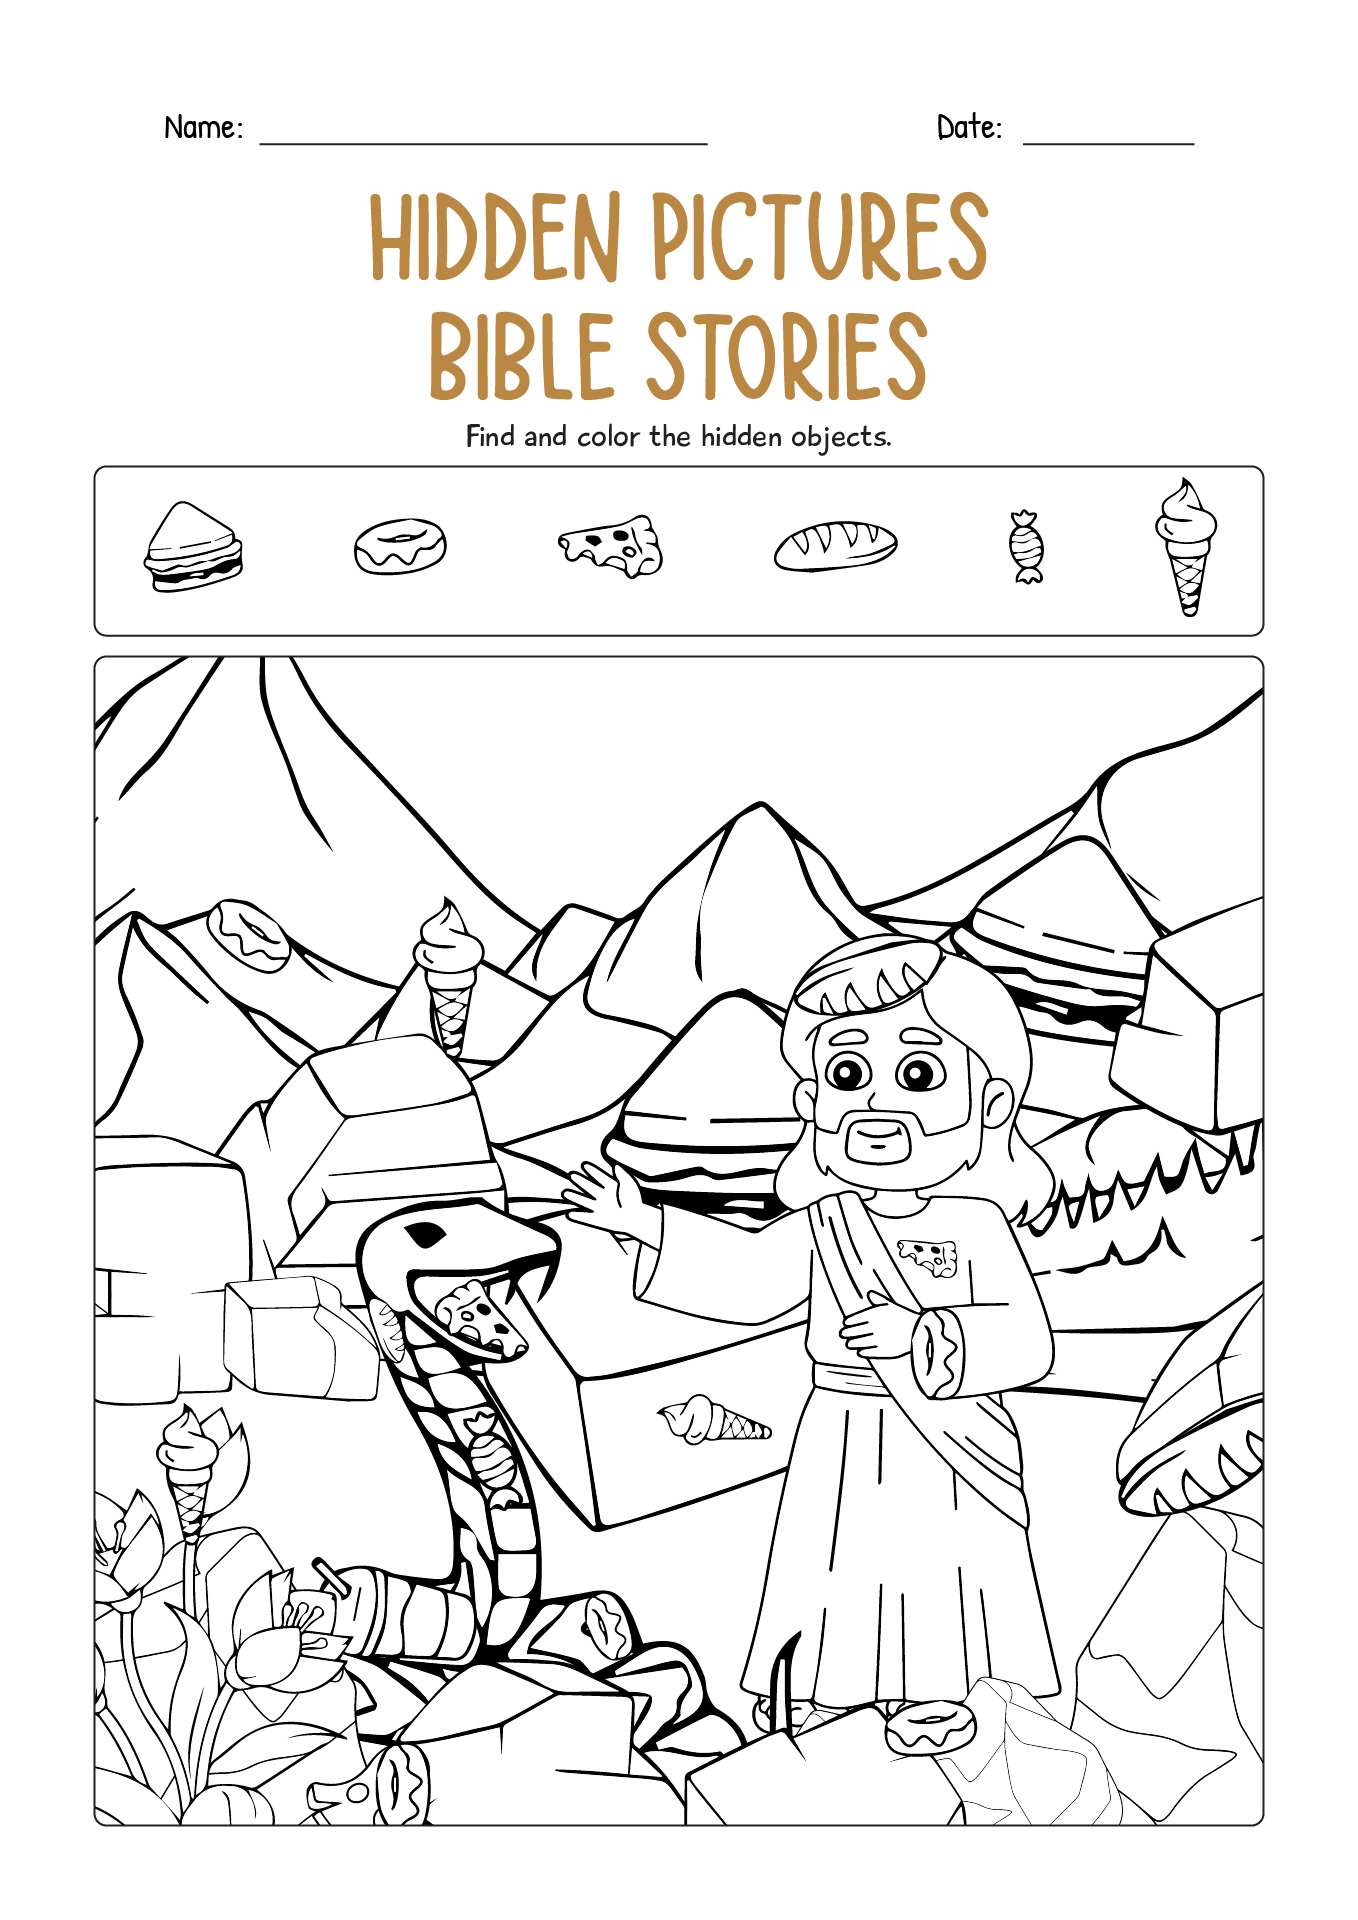 15-best-images-of-bible-hidden-pictures-worksheets-bible-printables-hidden-objects-puzzle